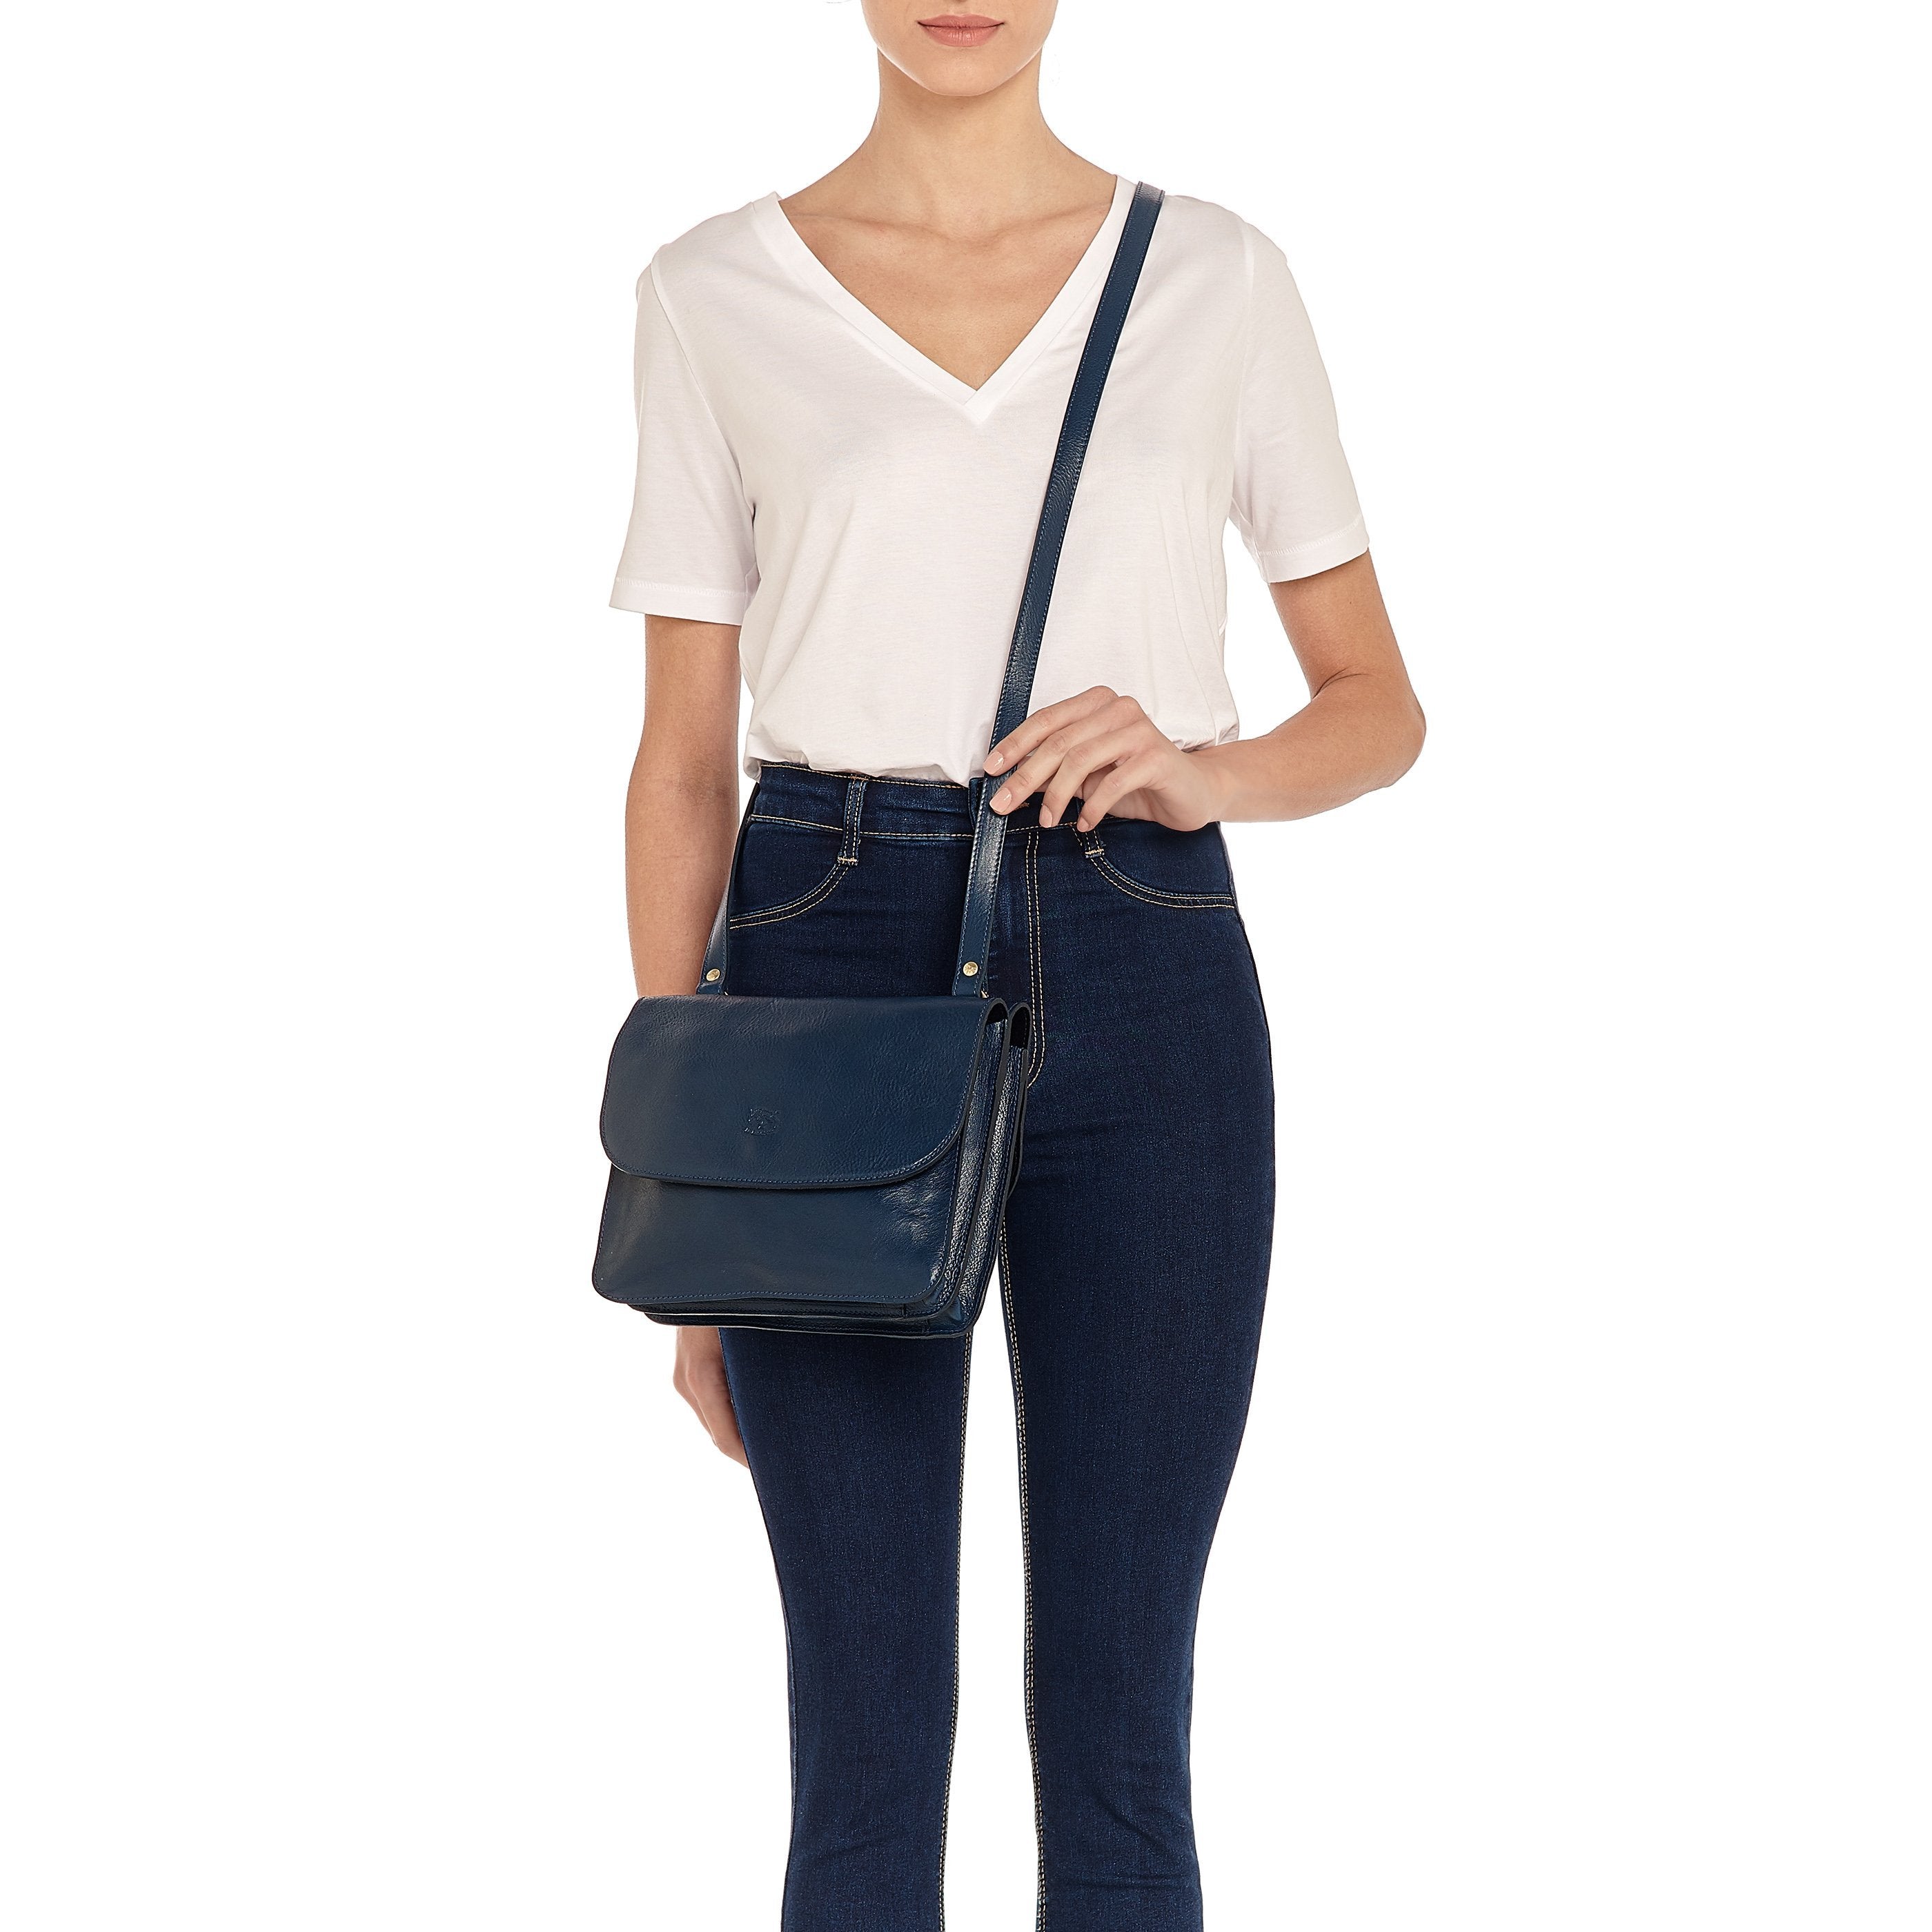 Salina | Women's crossbody bag in leather color blue